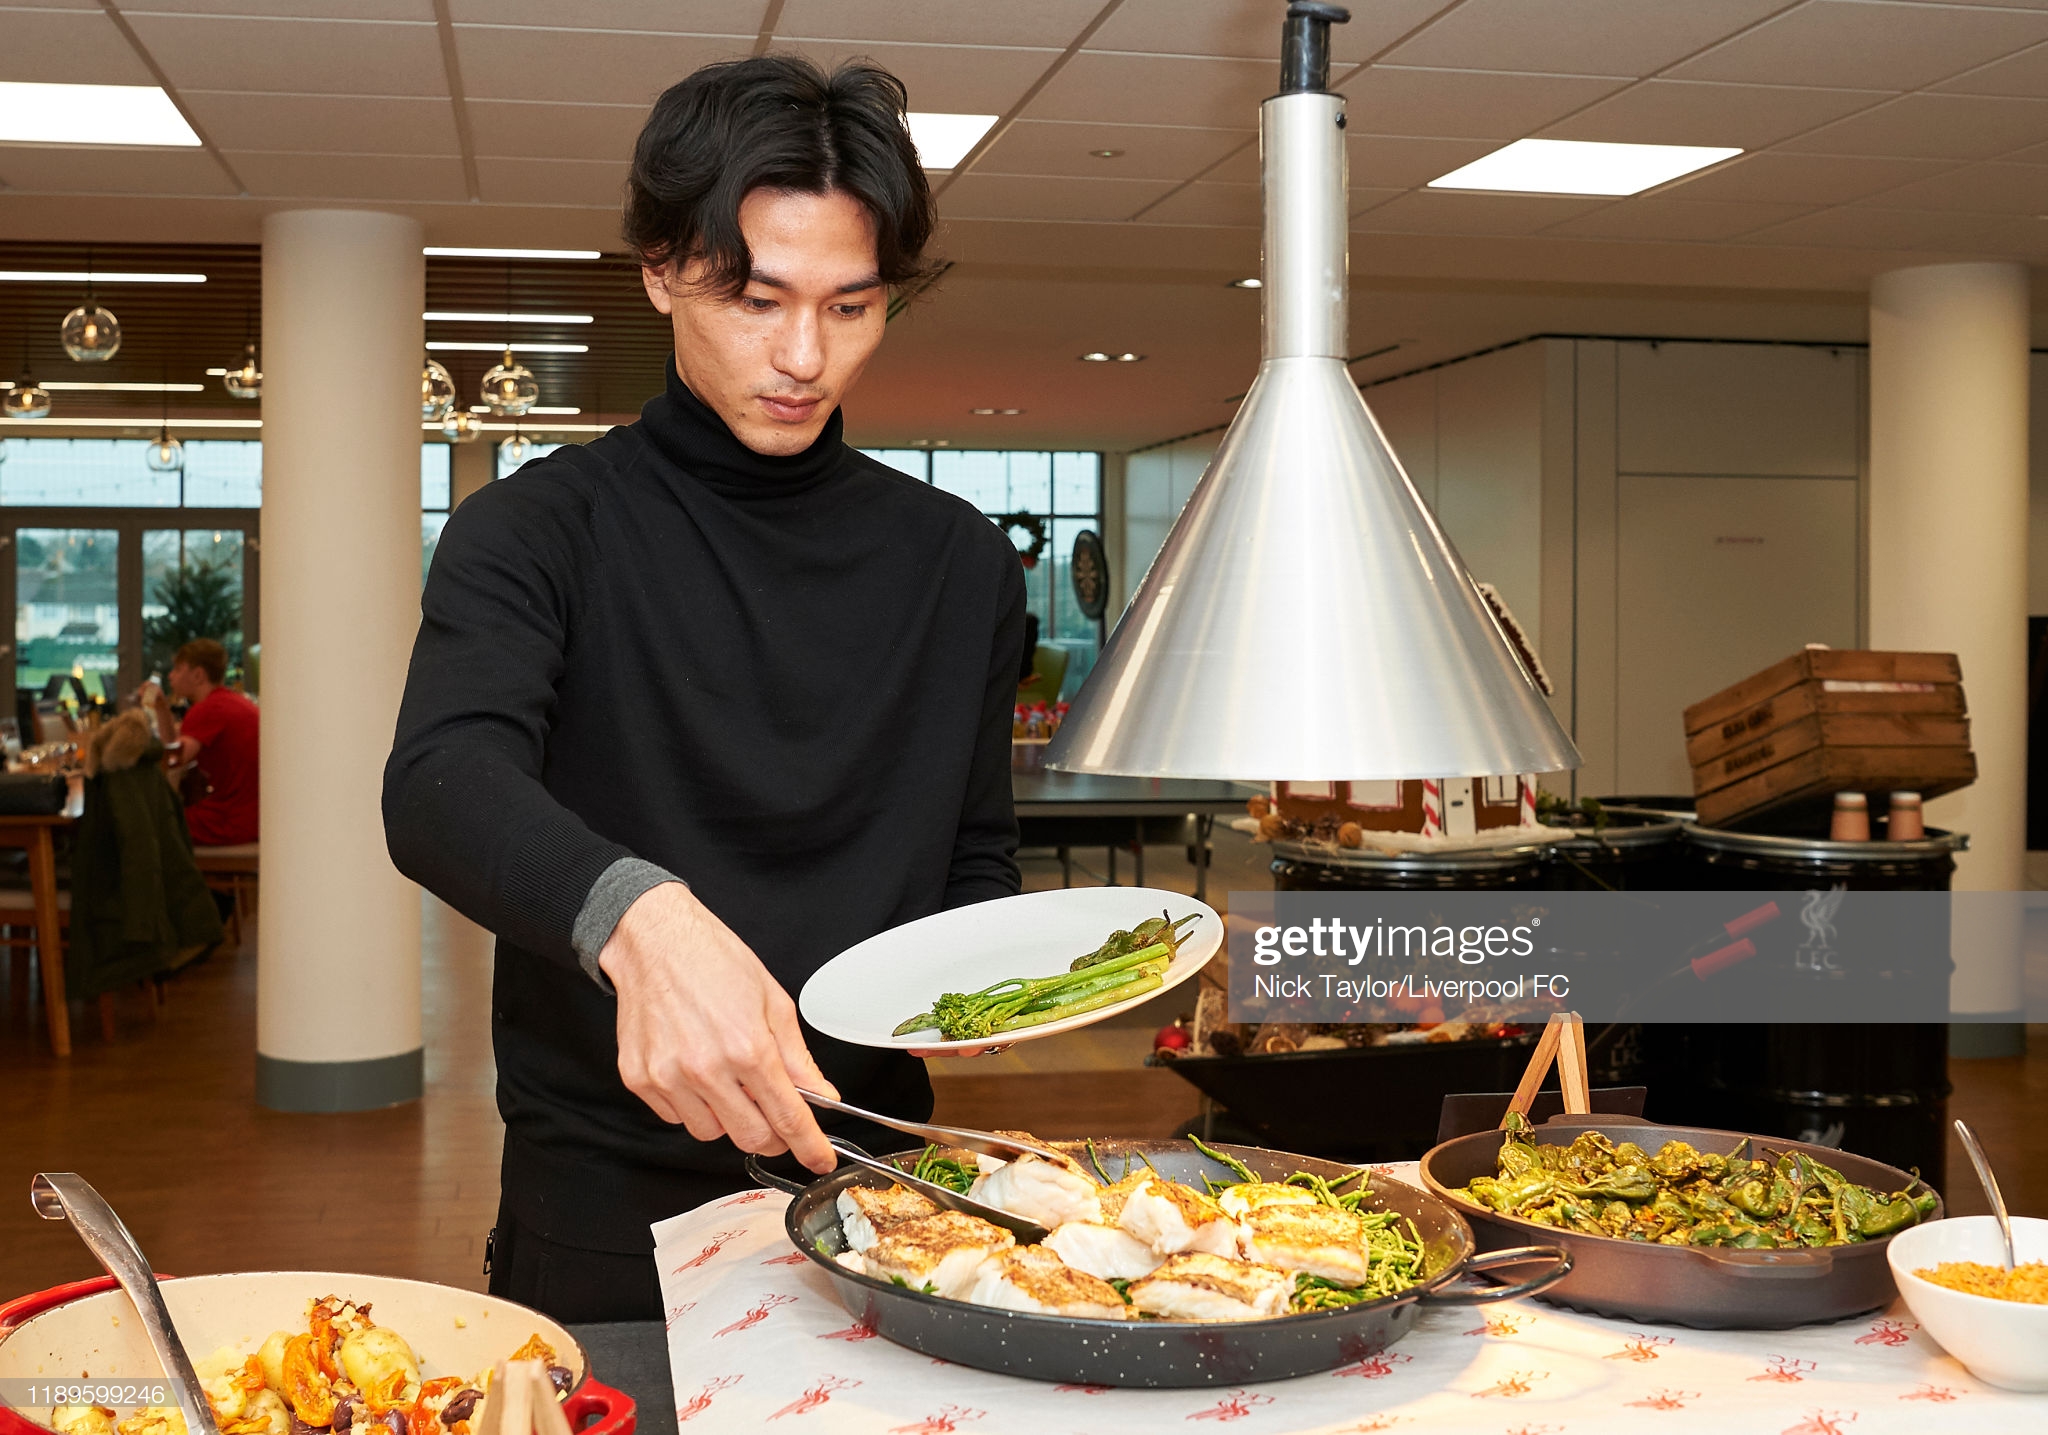 gettyimages-1189599246-2048x2048.jpg